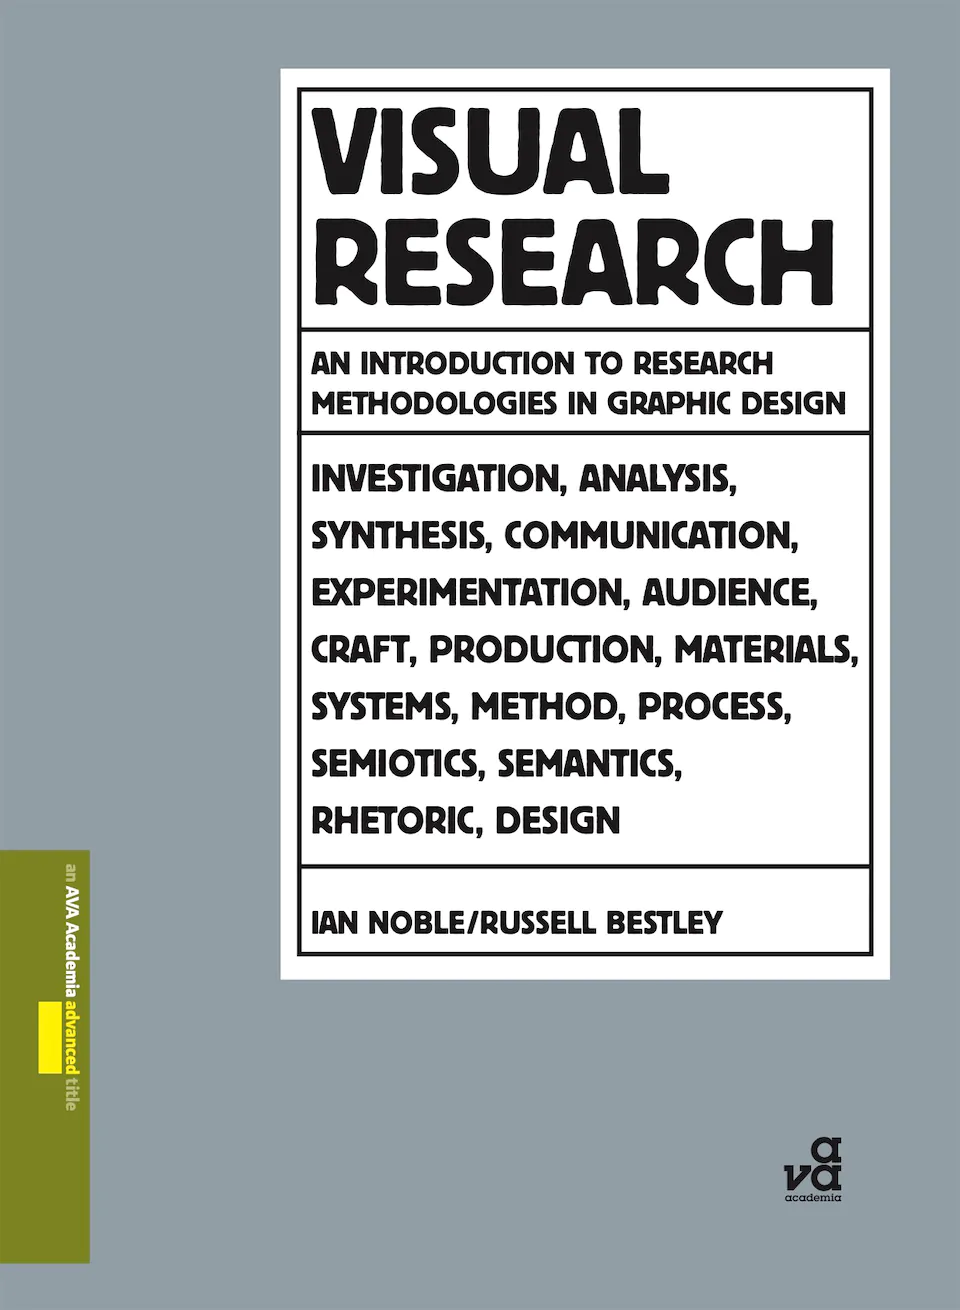 Visual Research: An Introduction to Research Methodologies in Graphic Design by Ian Noble, Russell Bestley